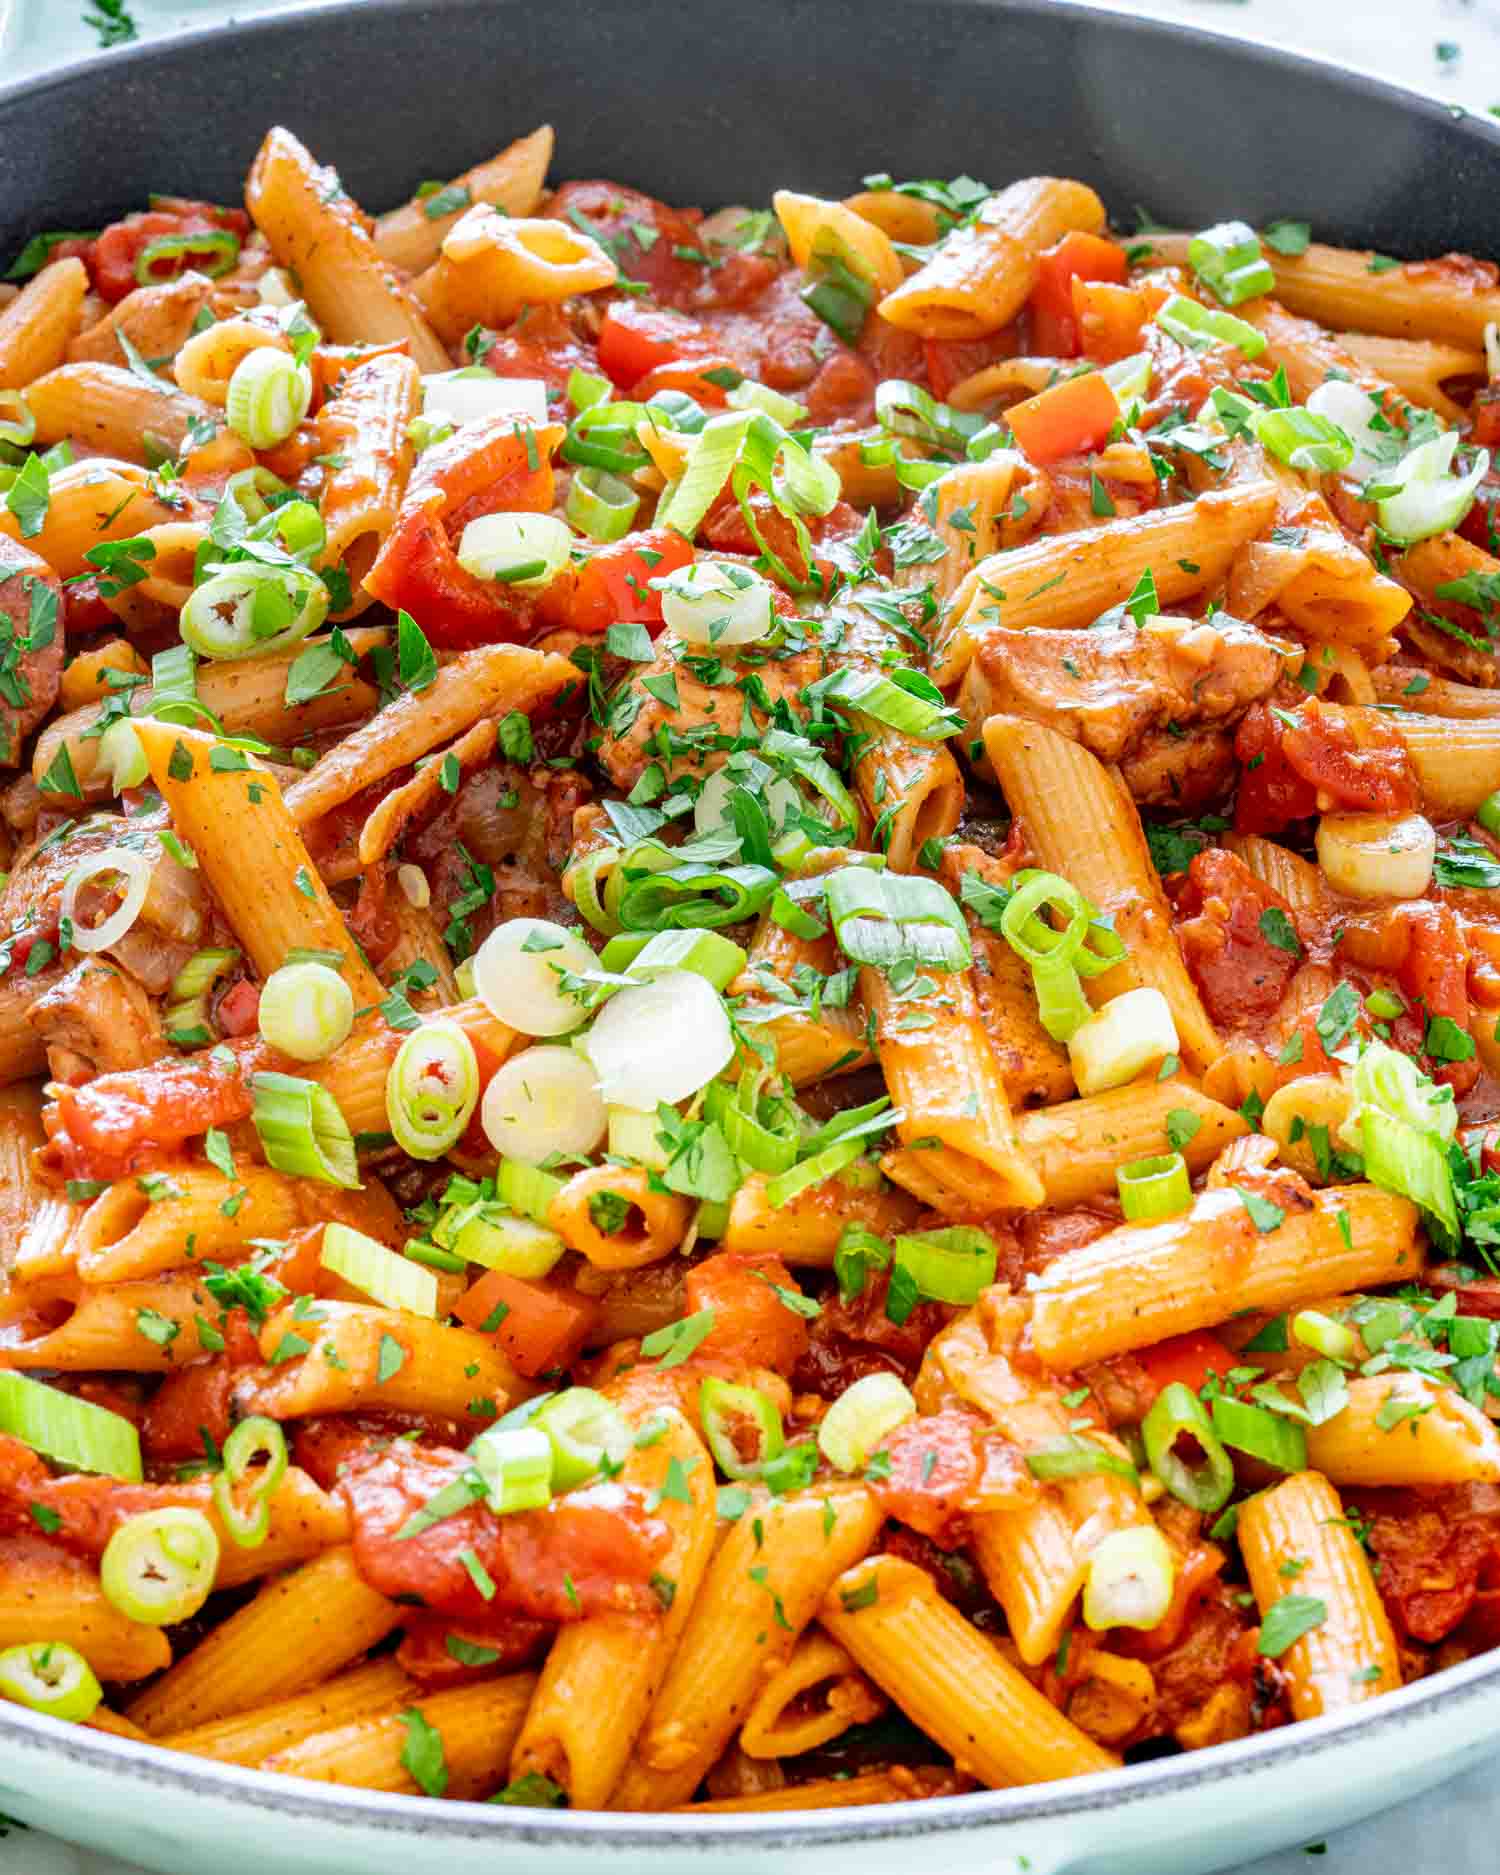 chicken and sausage penne jambalaya in a skillet garnished with green onions.